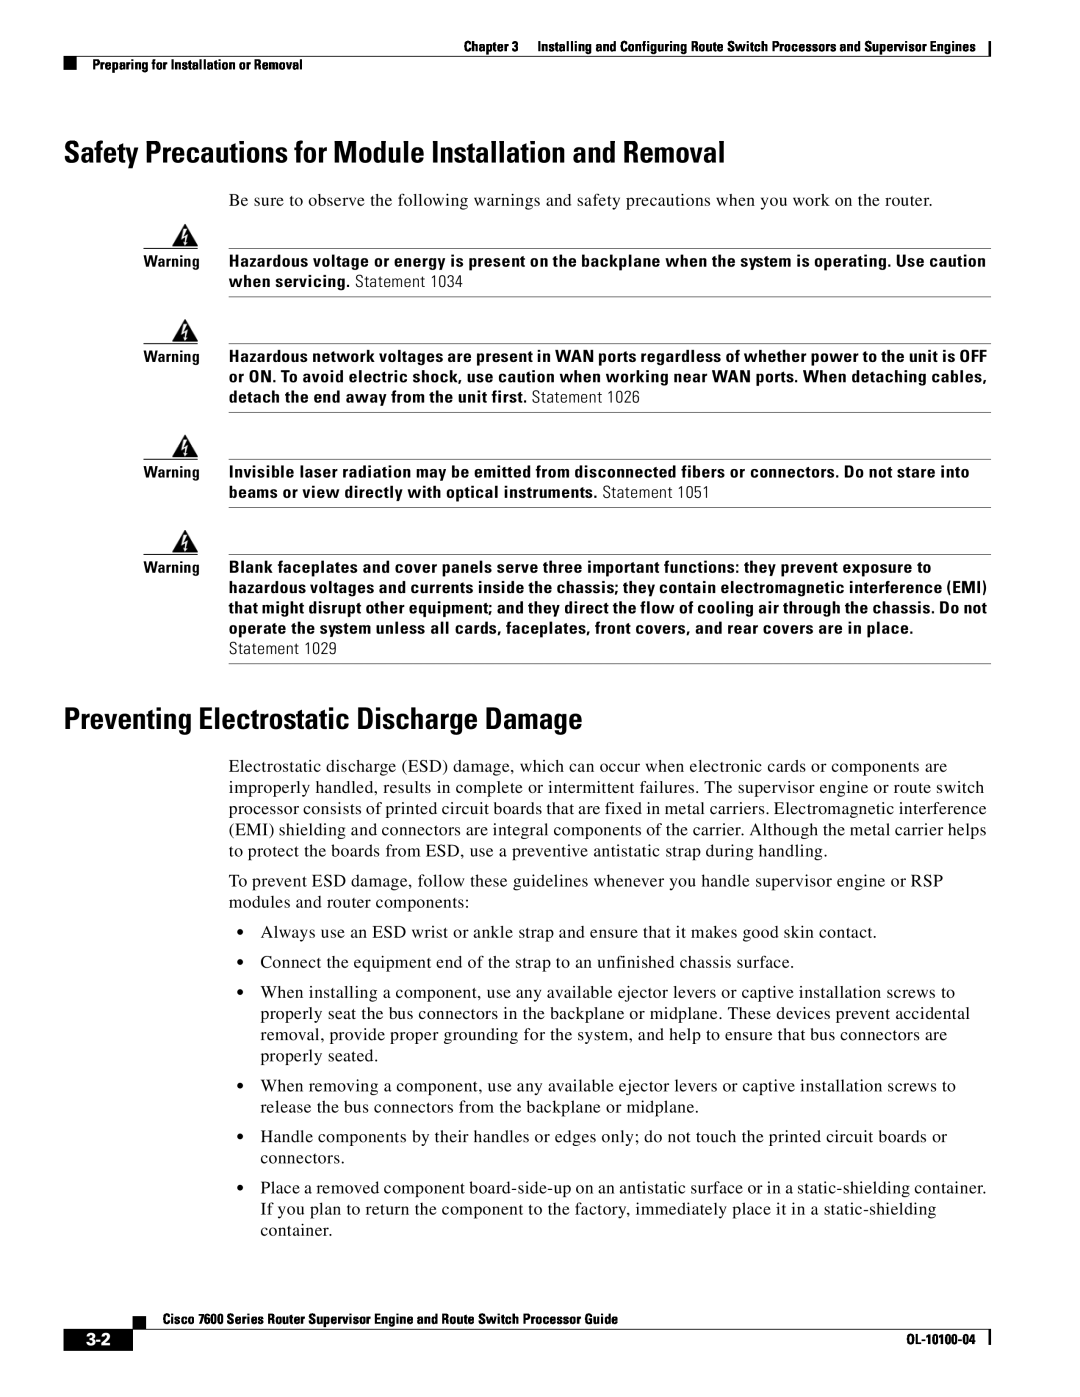 Cisco Systems 7600 manual Safety Precautions for Module Installation and Removal, Preventing Electrostatic Discharge Damage 